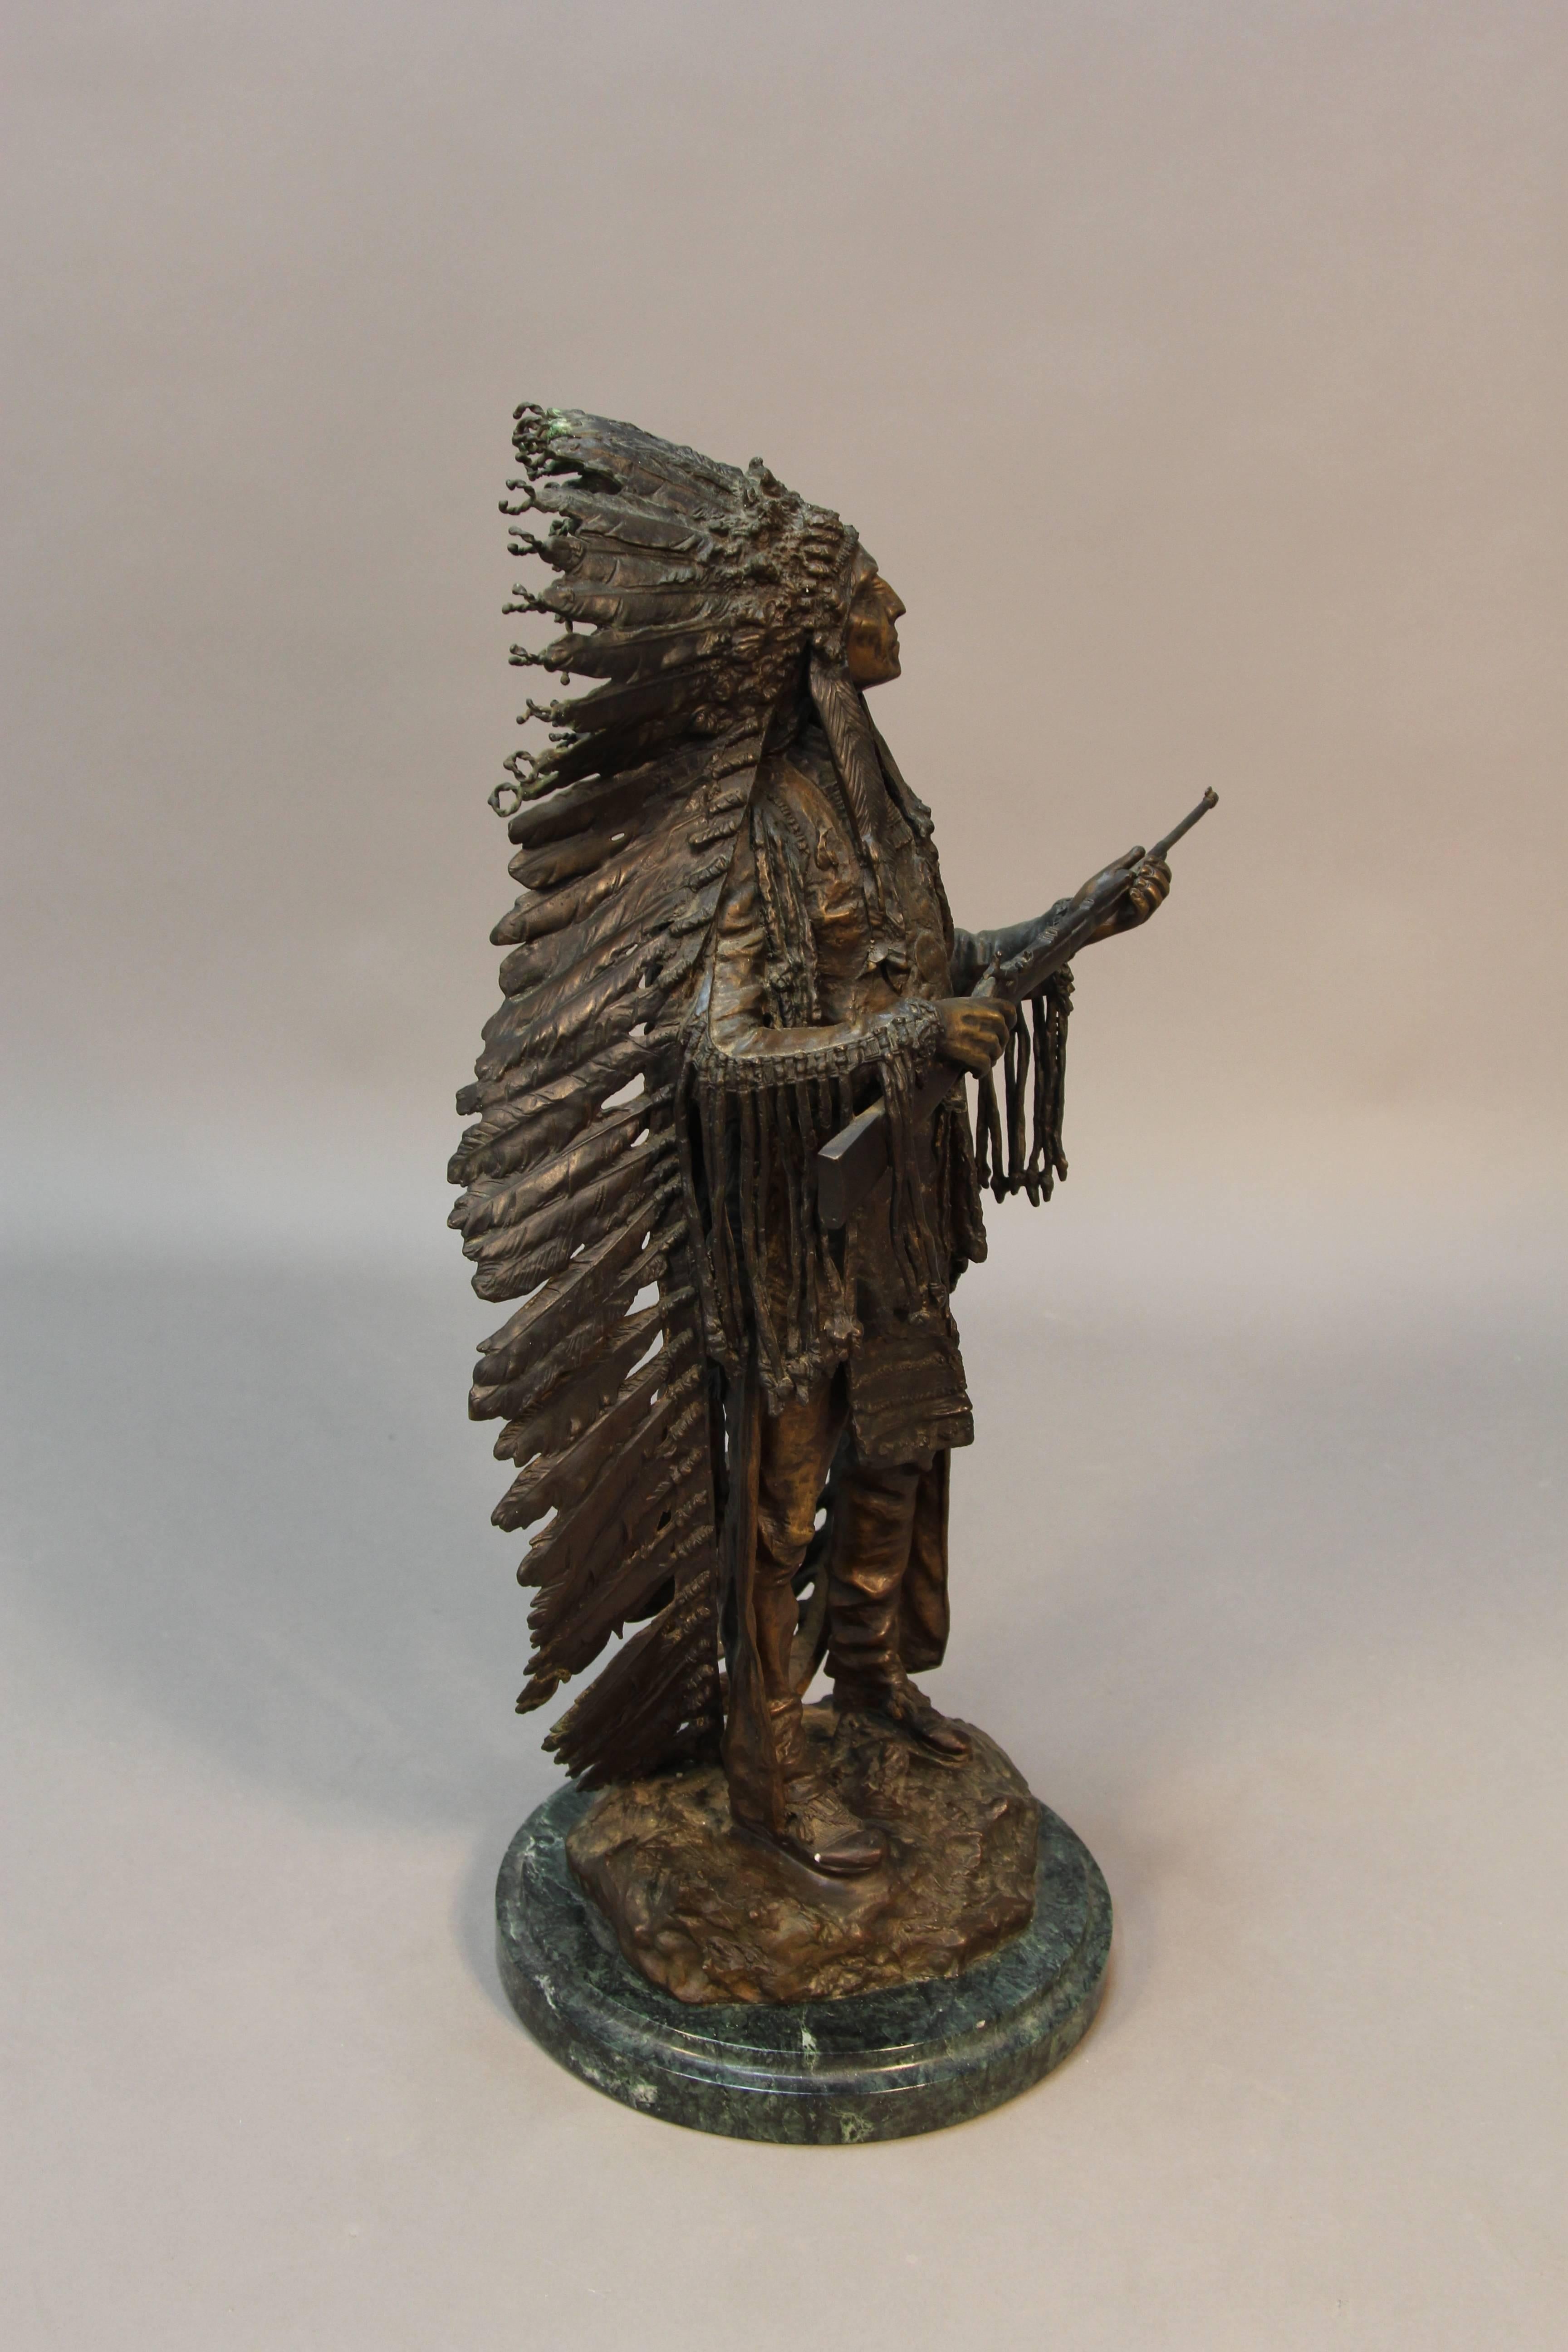 American Indian statue by Carl Kauba in 1910. Austrian sculptor know for Western Native American sculpture. This bronze piece is textured and very naturalistic.